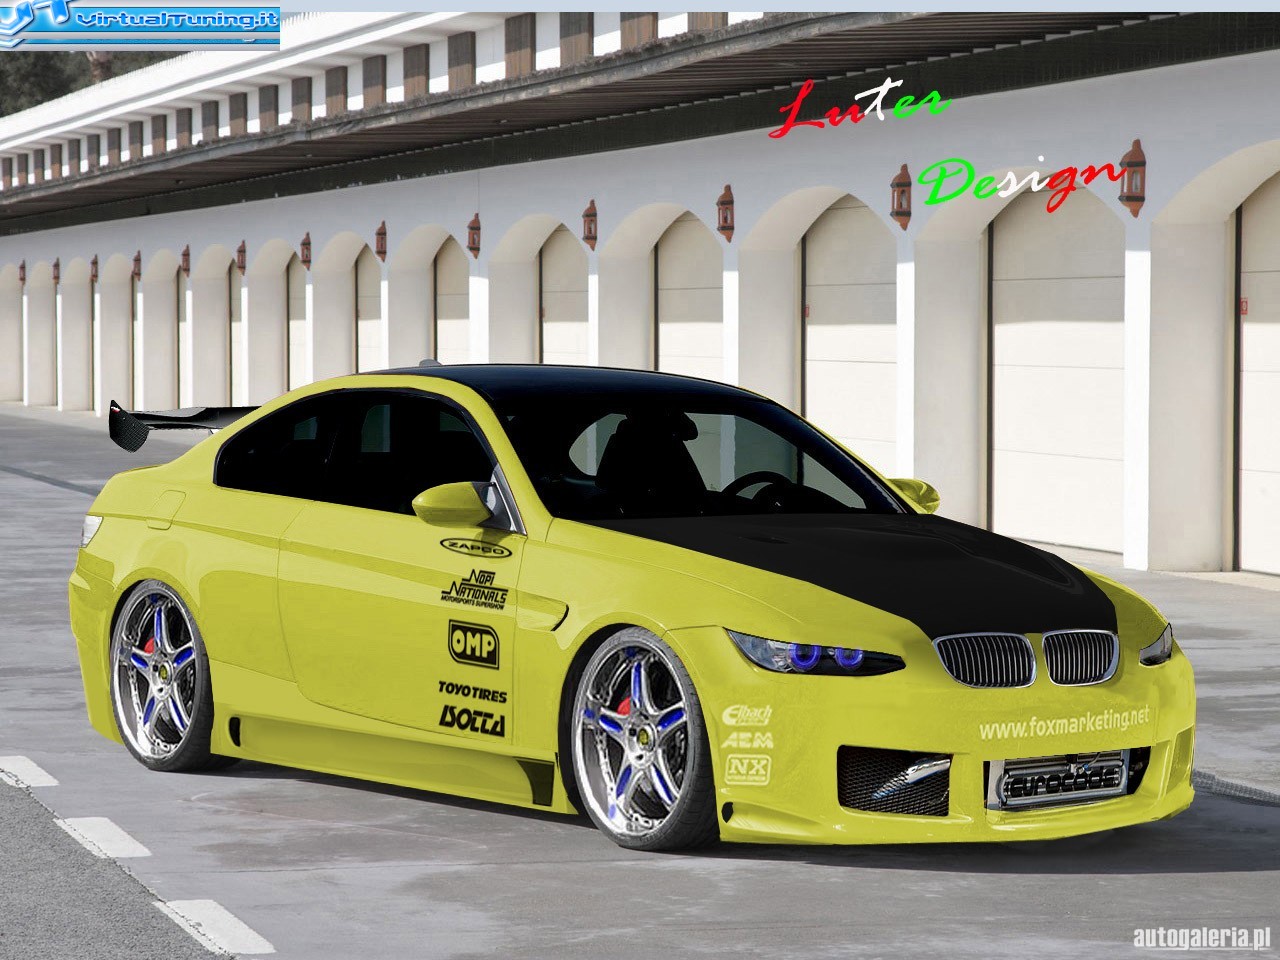 VirtualTuning BMW M3 by Luter